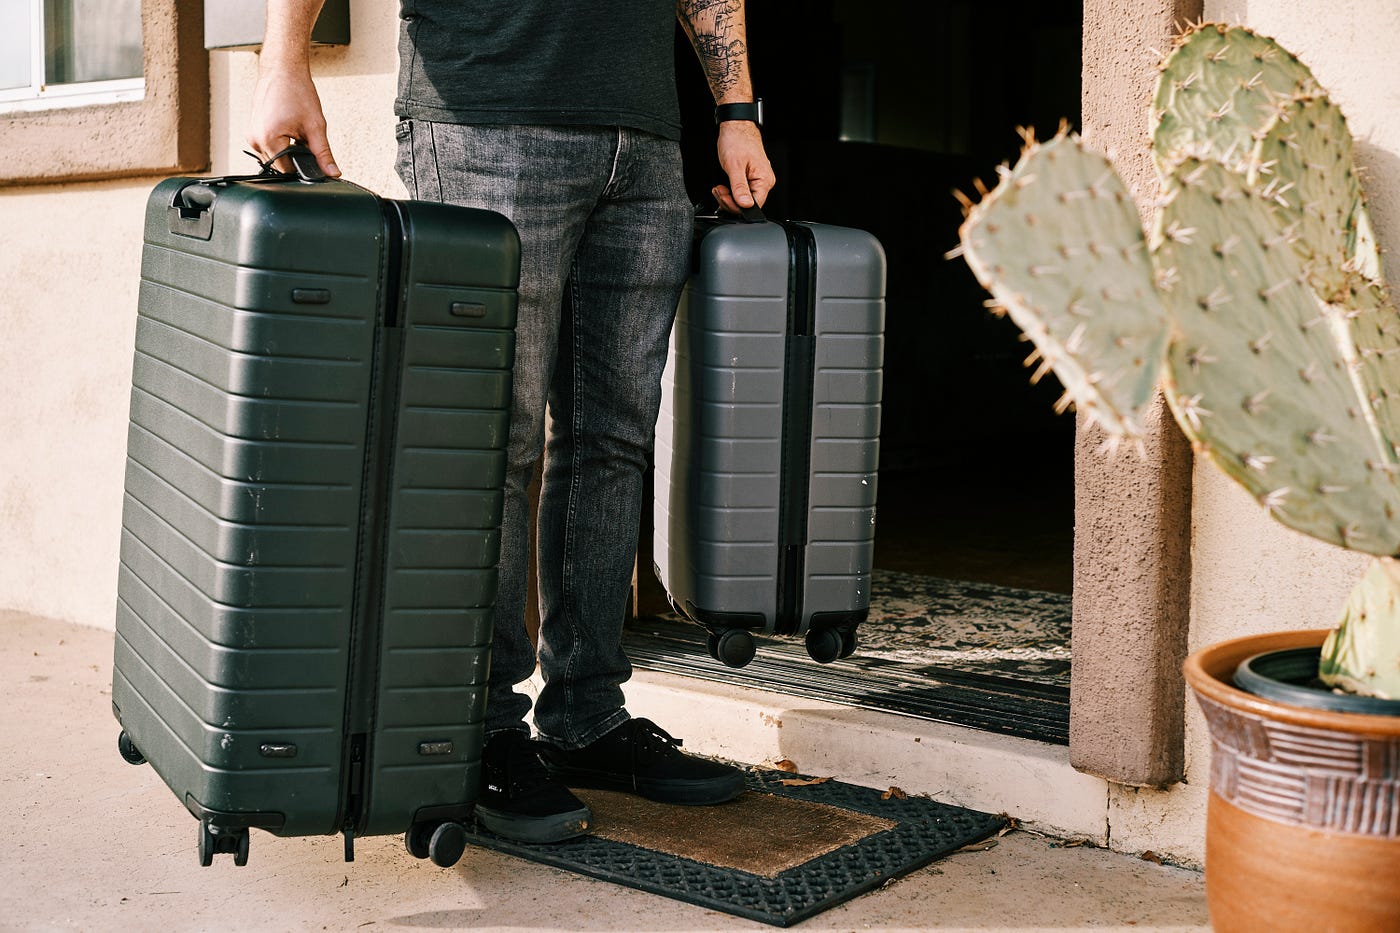 How To Pack a Suitcase More Efficiently